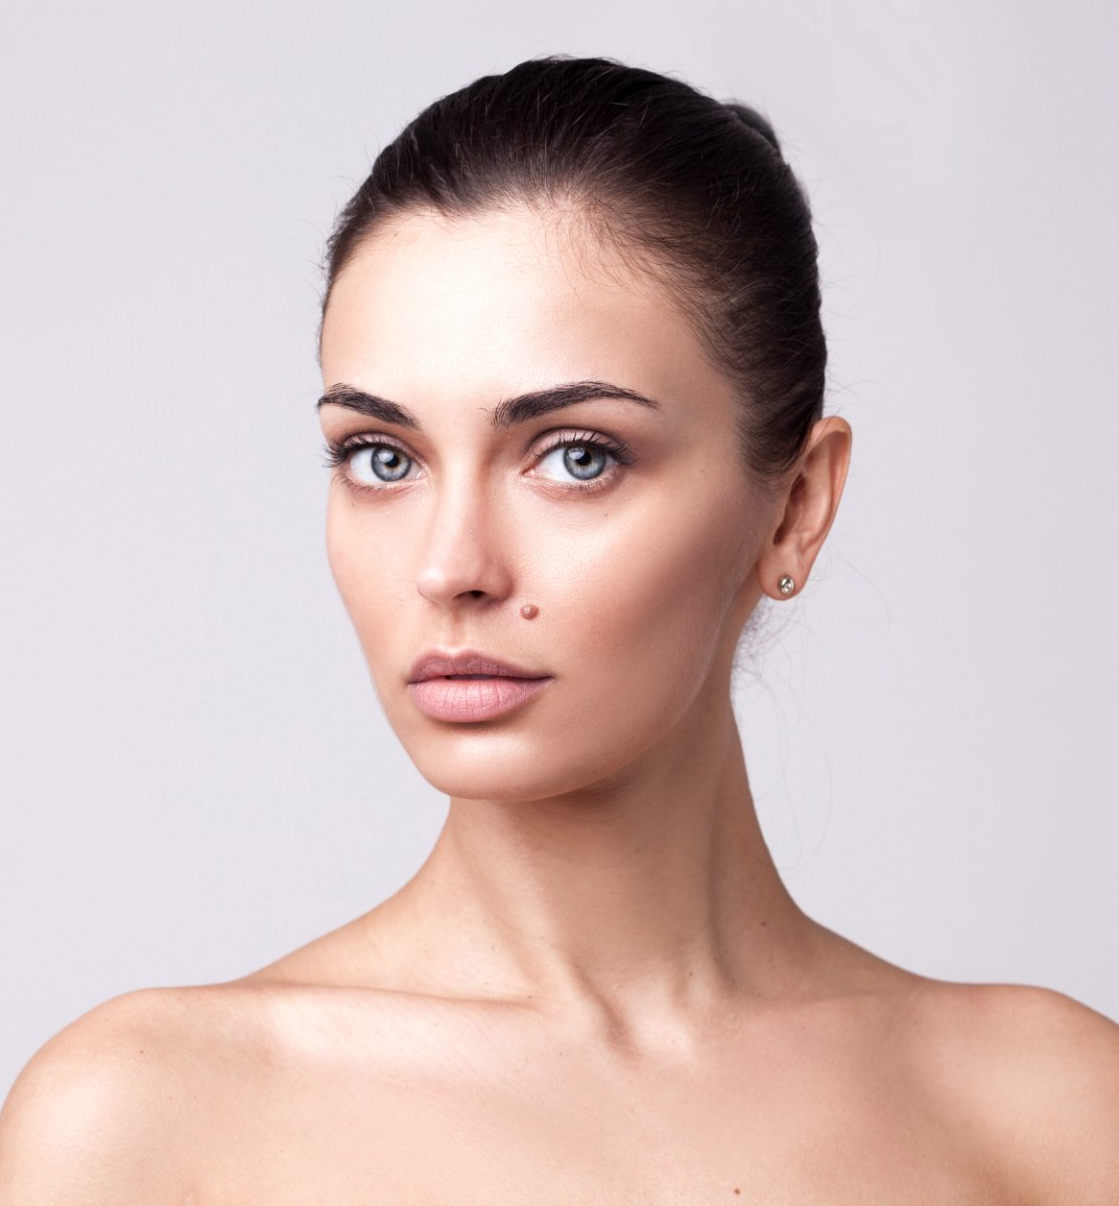 female model with large mole beauty mark on face